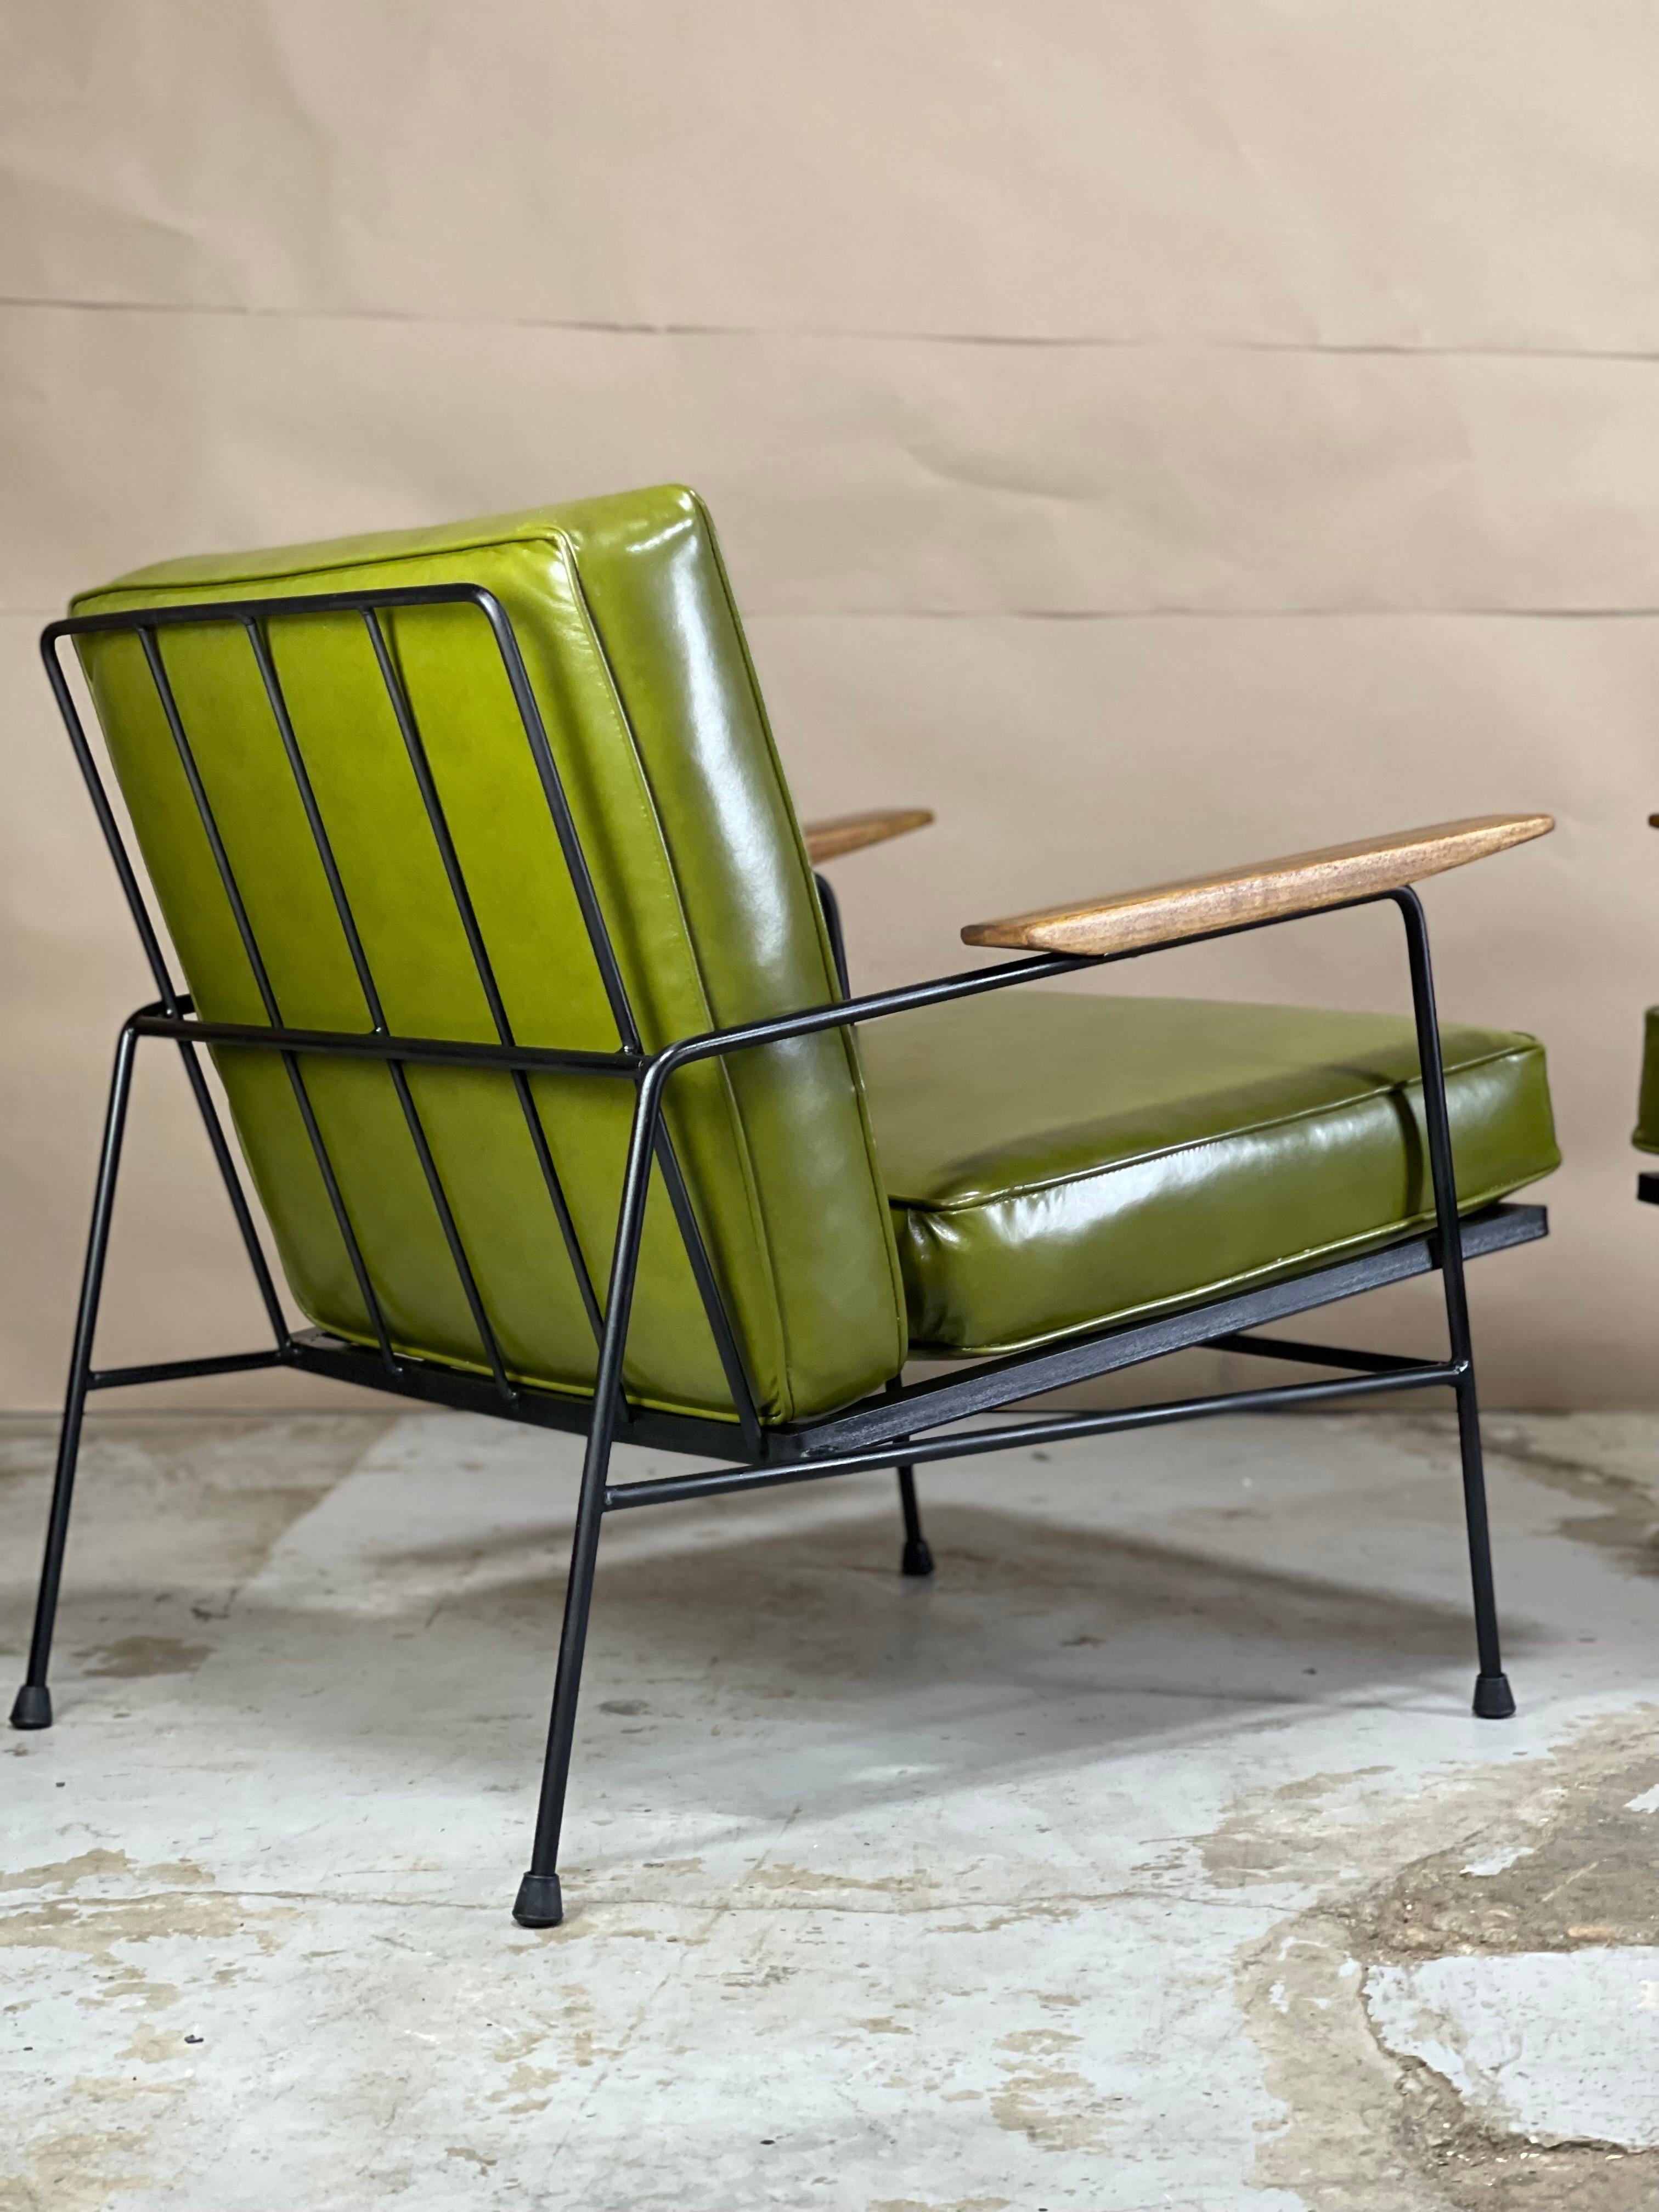 Naugahyde Mid-Century Lounge Chairs by Max Stout 1959  For Sale